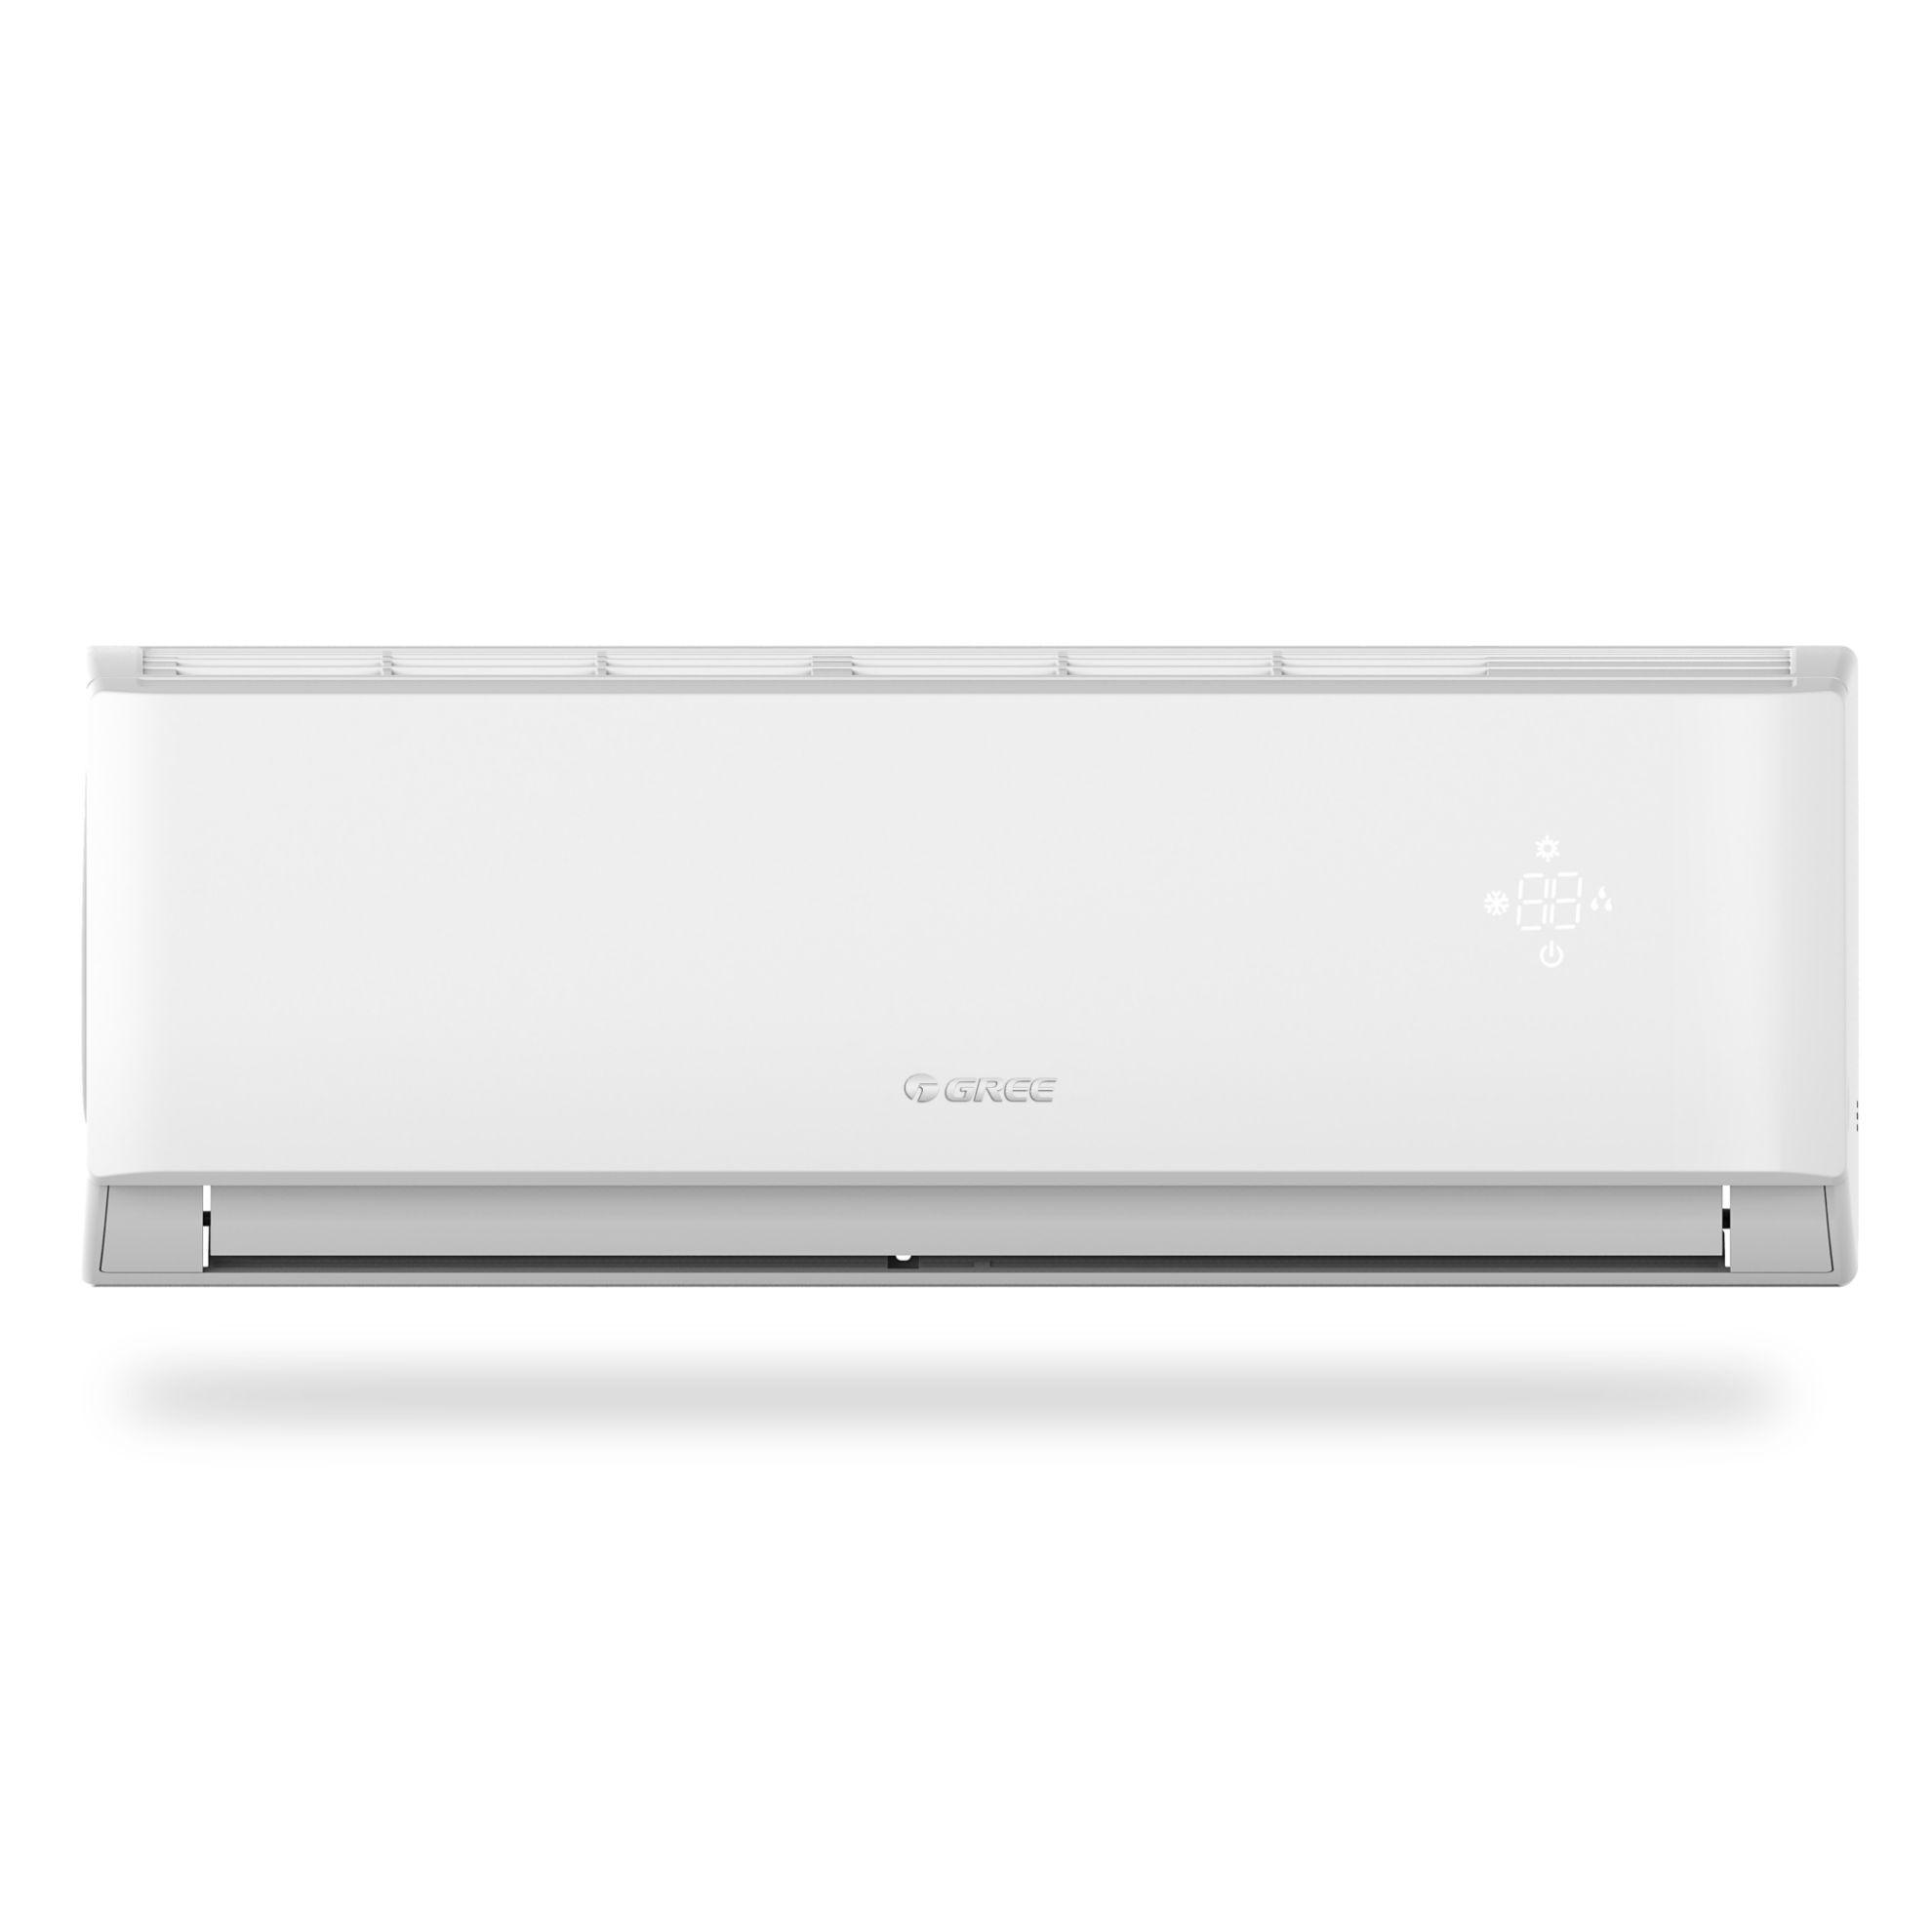 Picture of Gree - Lomo-P20C3 - 1.6 Ton|Reciprocating|Wall Split AC